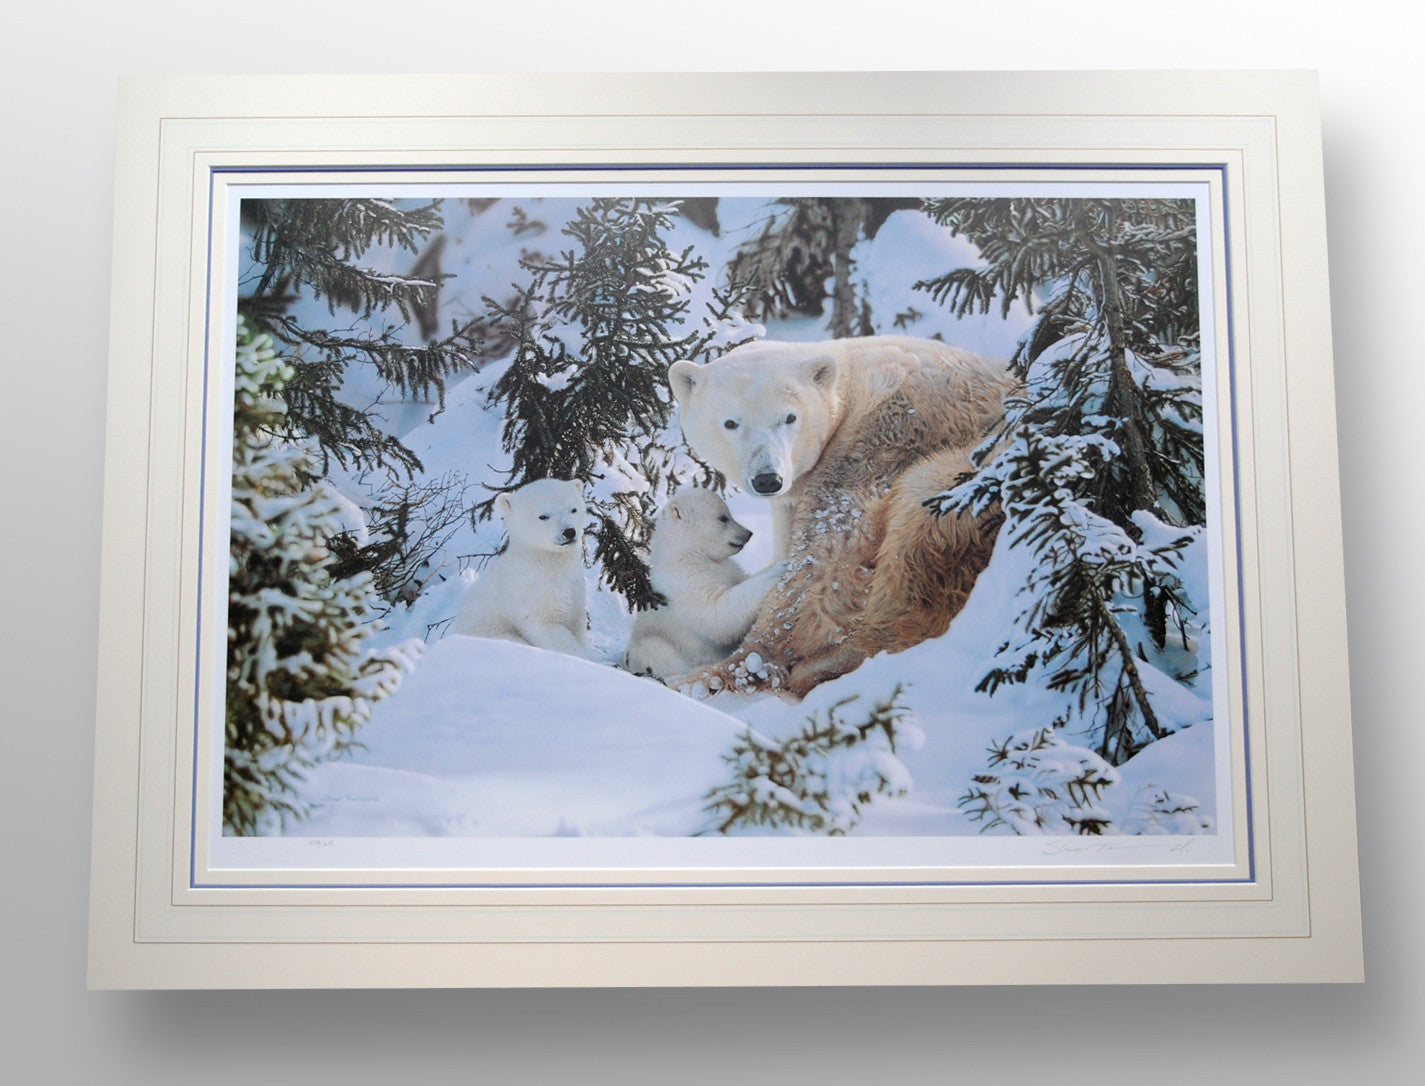 "Warmth of Nature" by Steven Townsend (limited edition print)